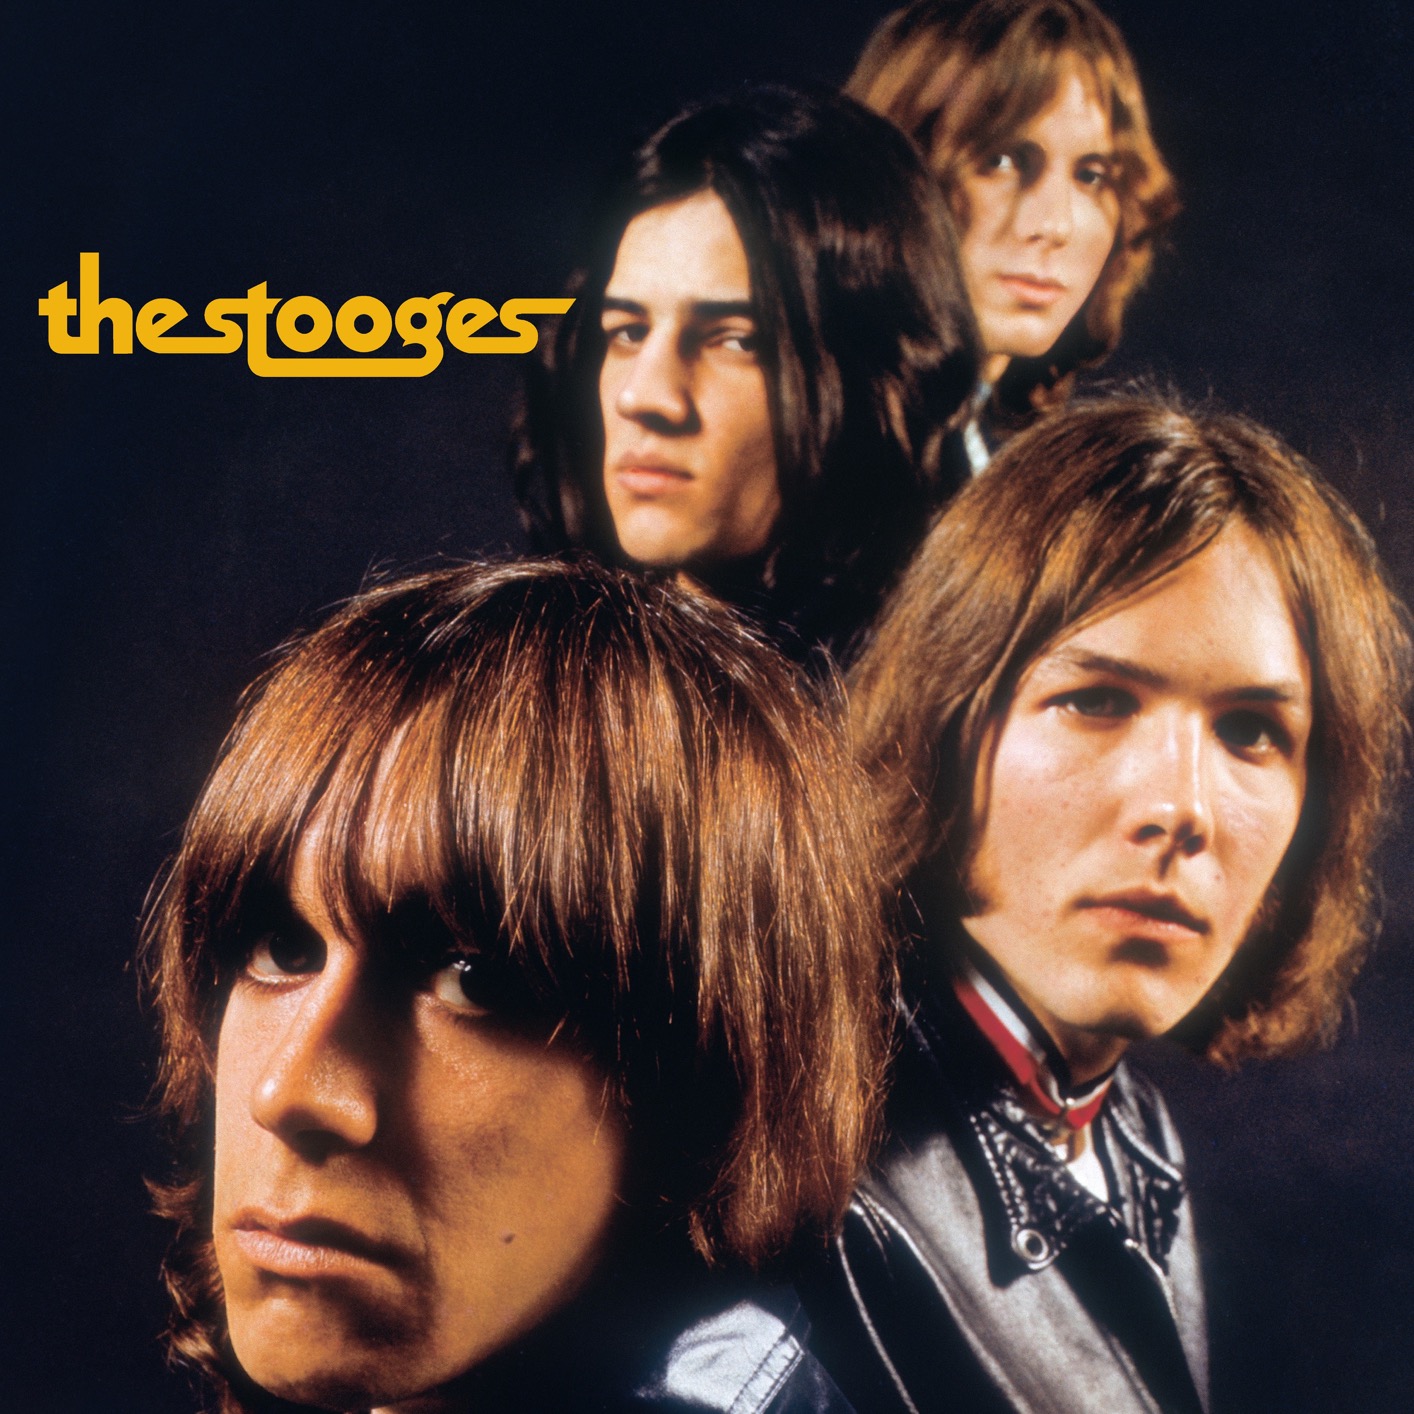 The Stooges – The Stooges (1969) (50th Anniversary Deluxe Edition) (2019 Remaster) [FLAC 24bit/96kHz]